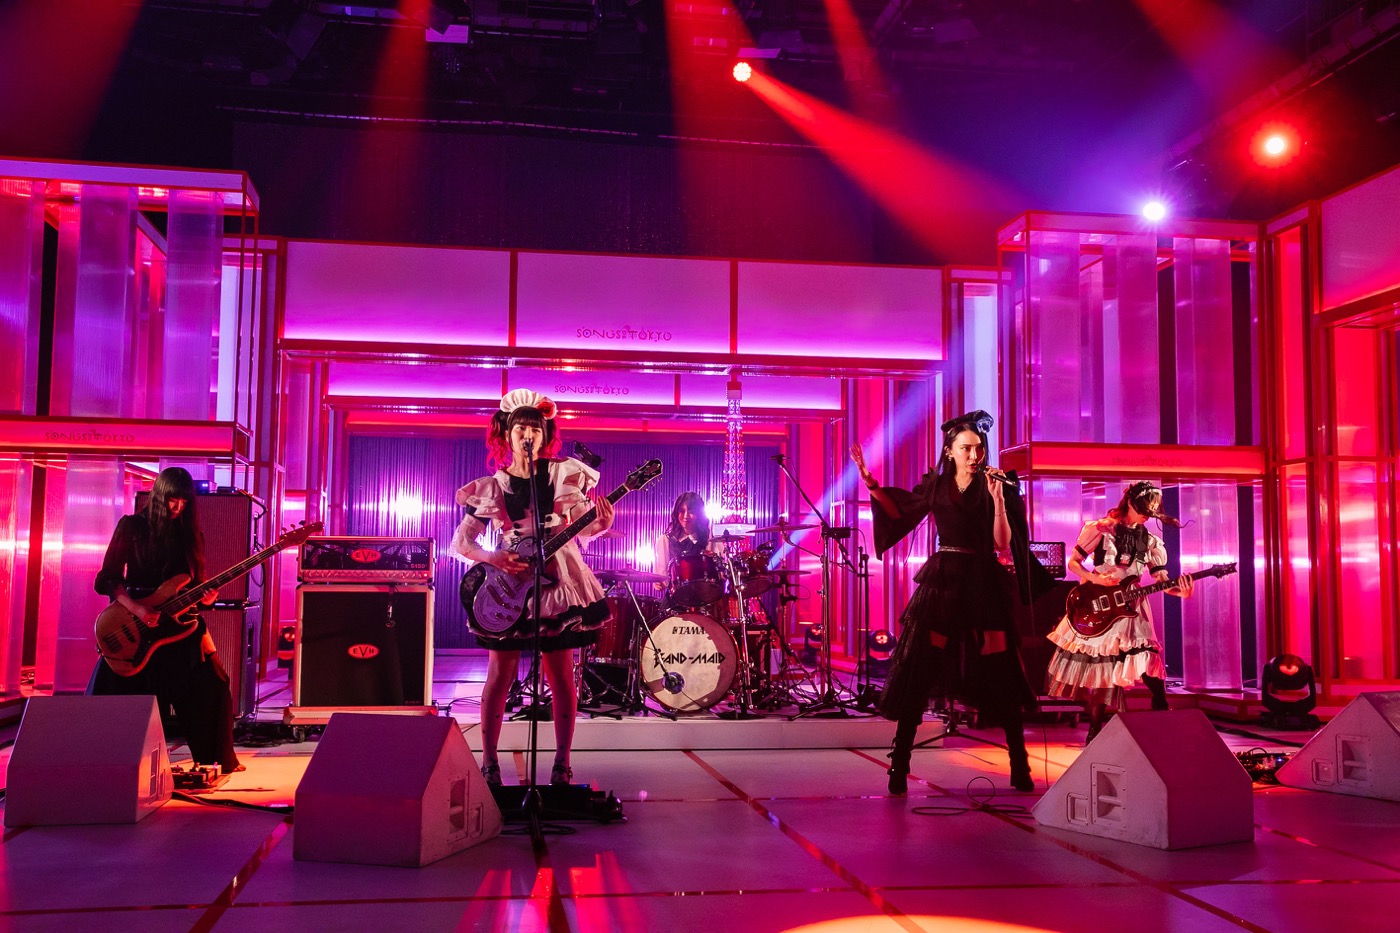 『SONGS OF TOKYO』最終回に、BAND-MAID、ヤバイTシャツ屋さん、由薫が出演決定 - 画像一覧（3/3）